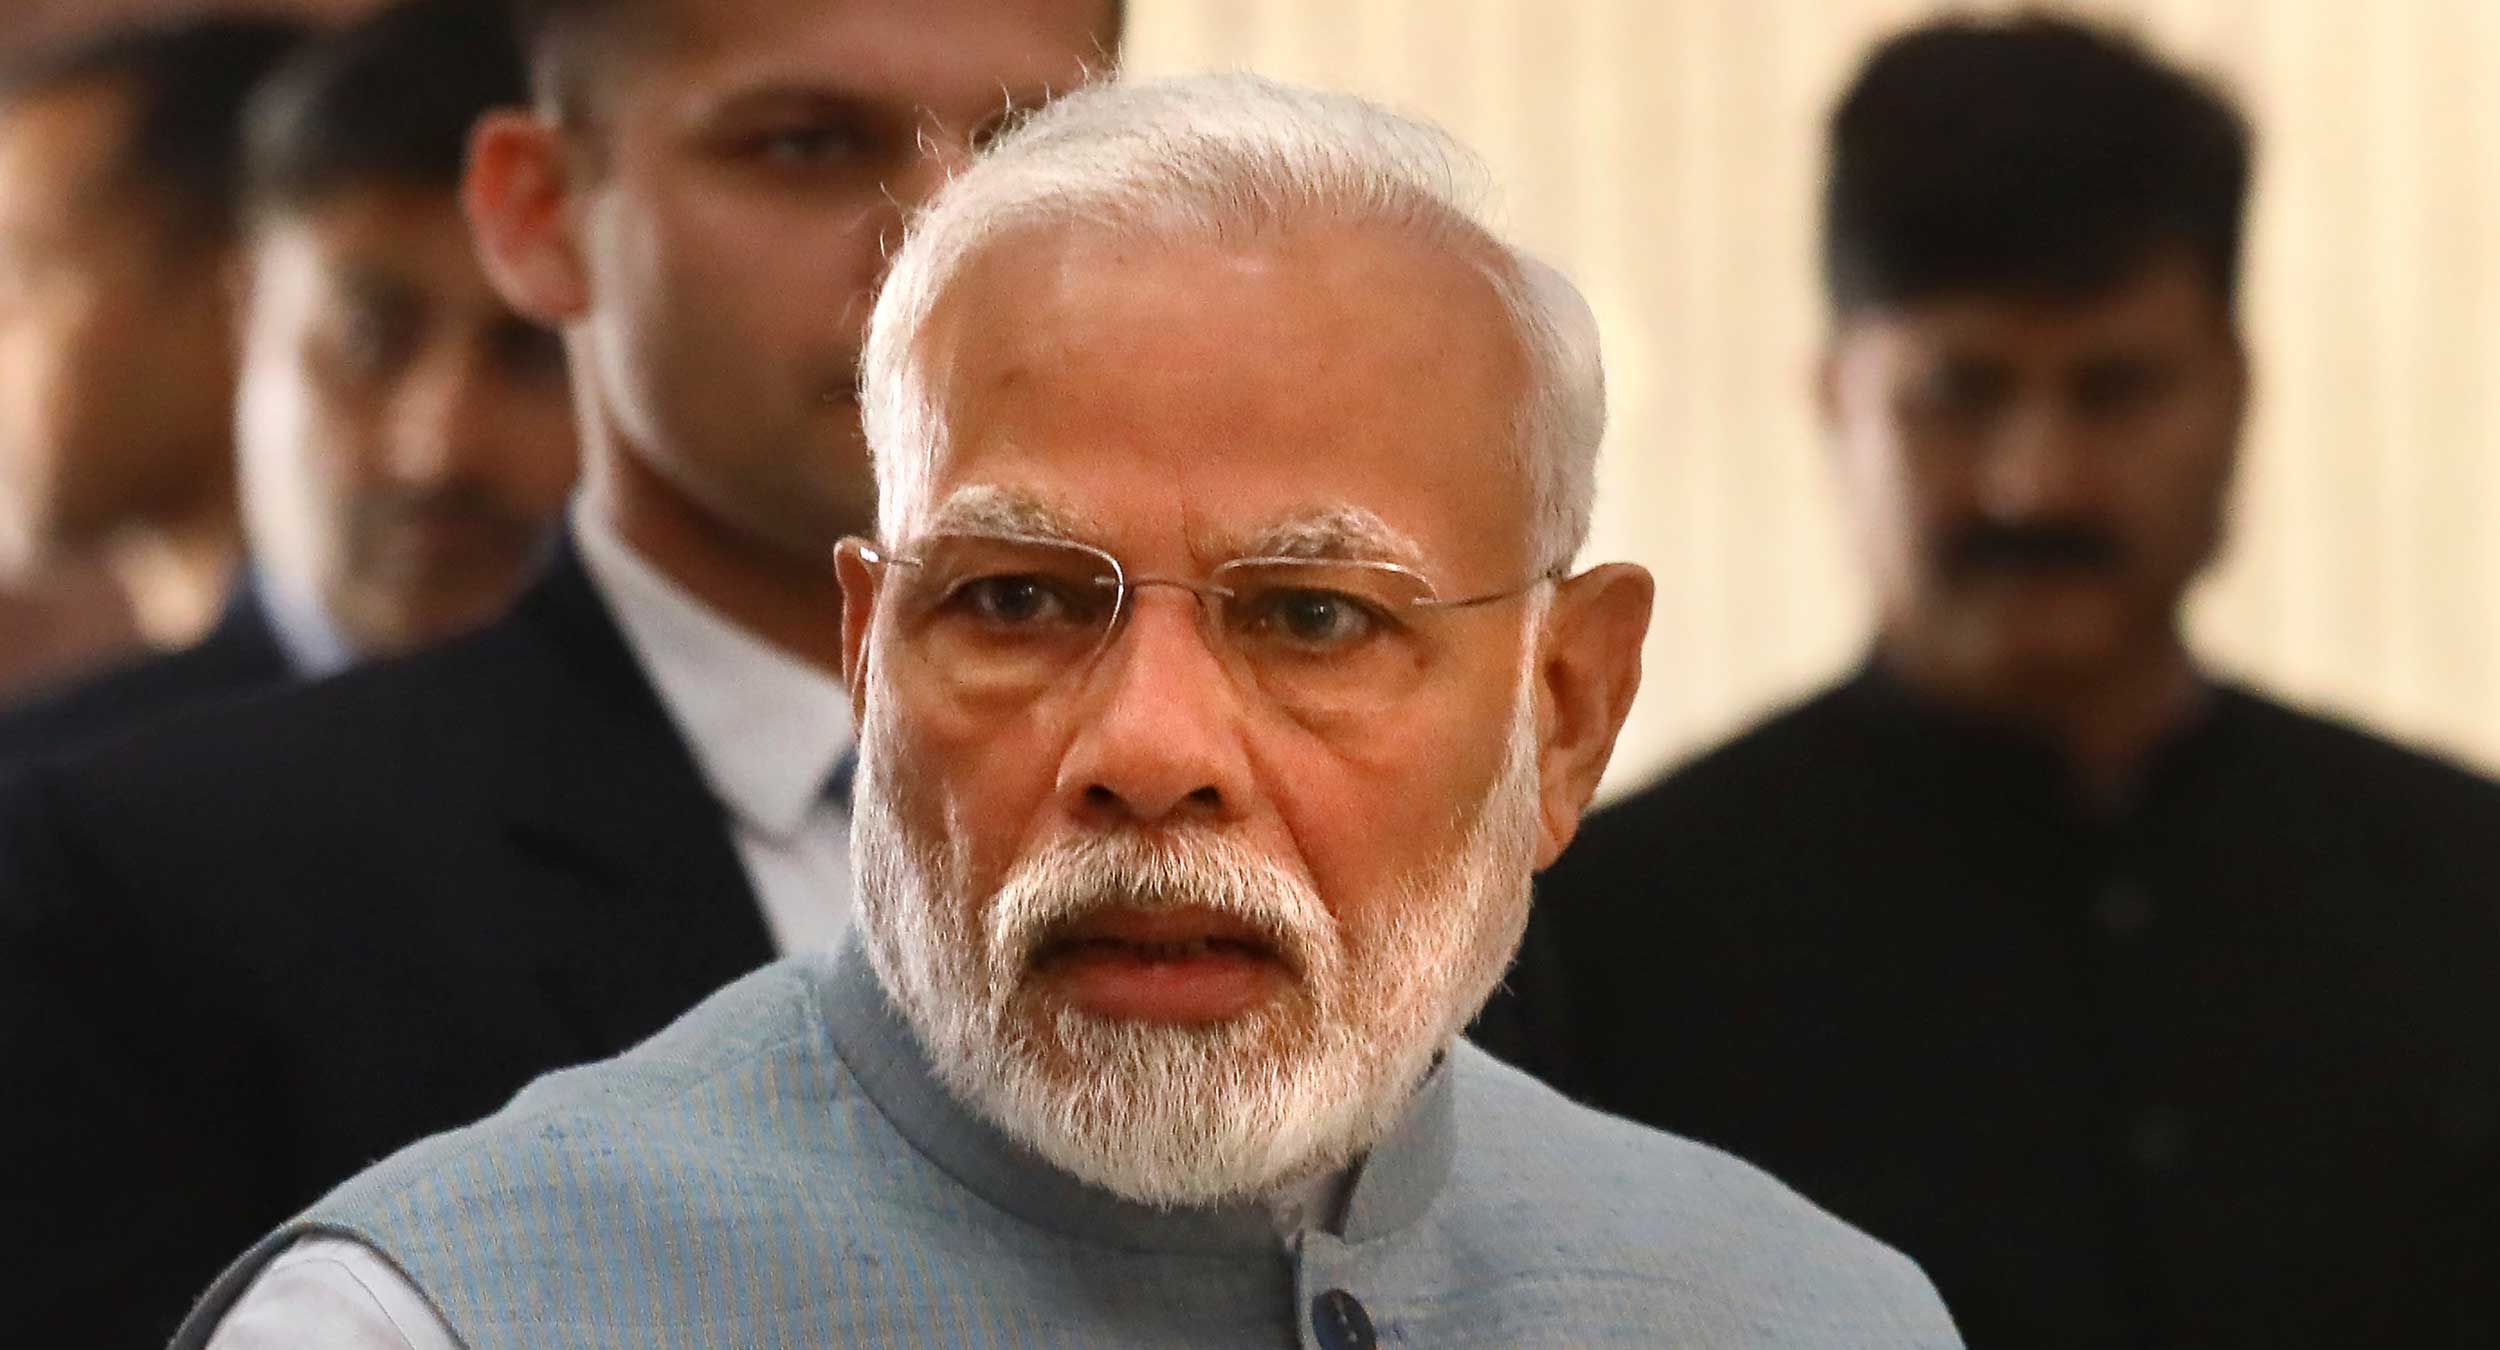 Chairing the first meeting of the council of ministers since announcing the 21-day lockdown on March 24, Modi asked them to identify and implement pending reforms and draw up a “graded plan” to slowly open up businesses in areas where no Covid-19 hotspots currently exist.

